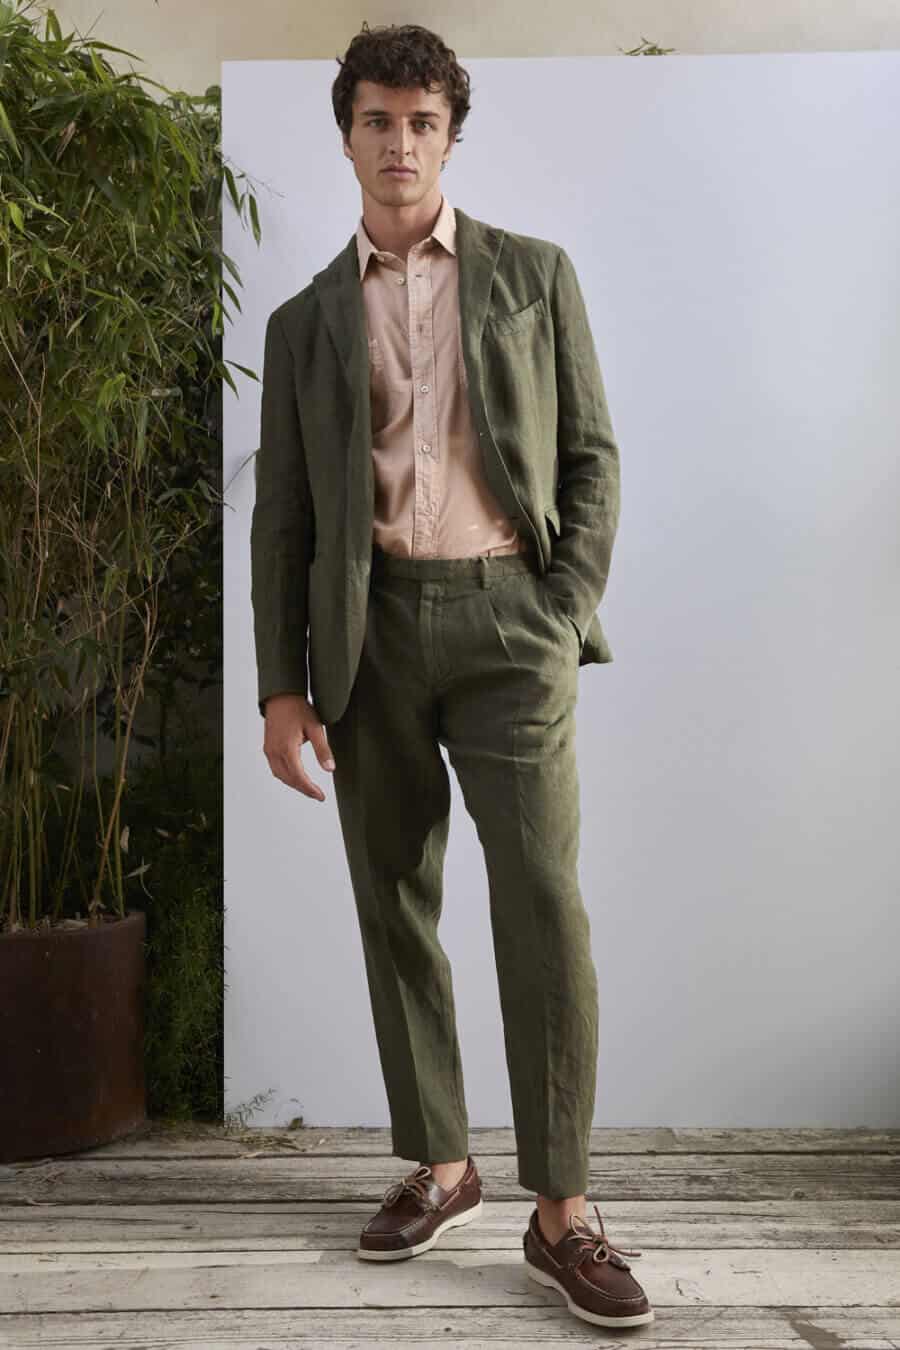 Men's olive green linen suit outfit worn with brown deck shoes